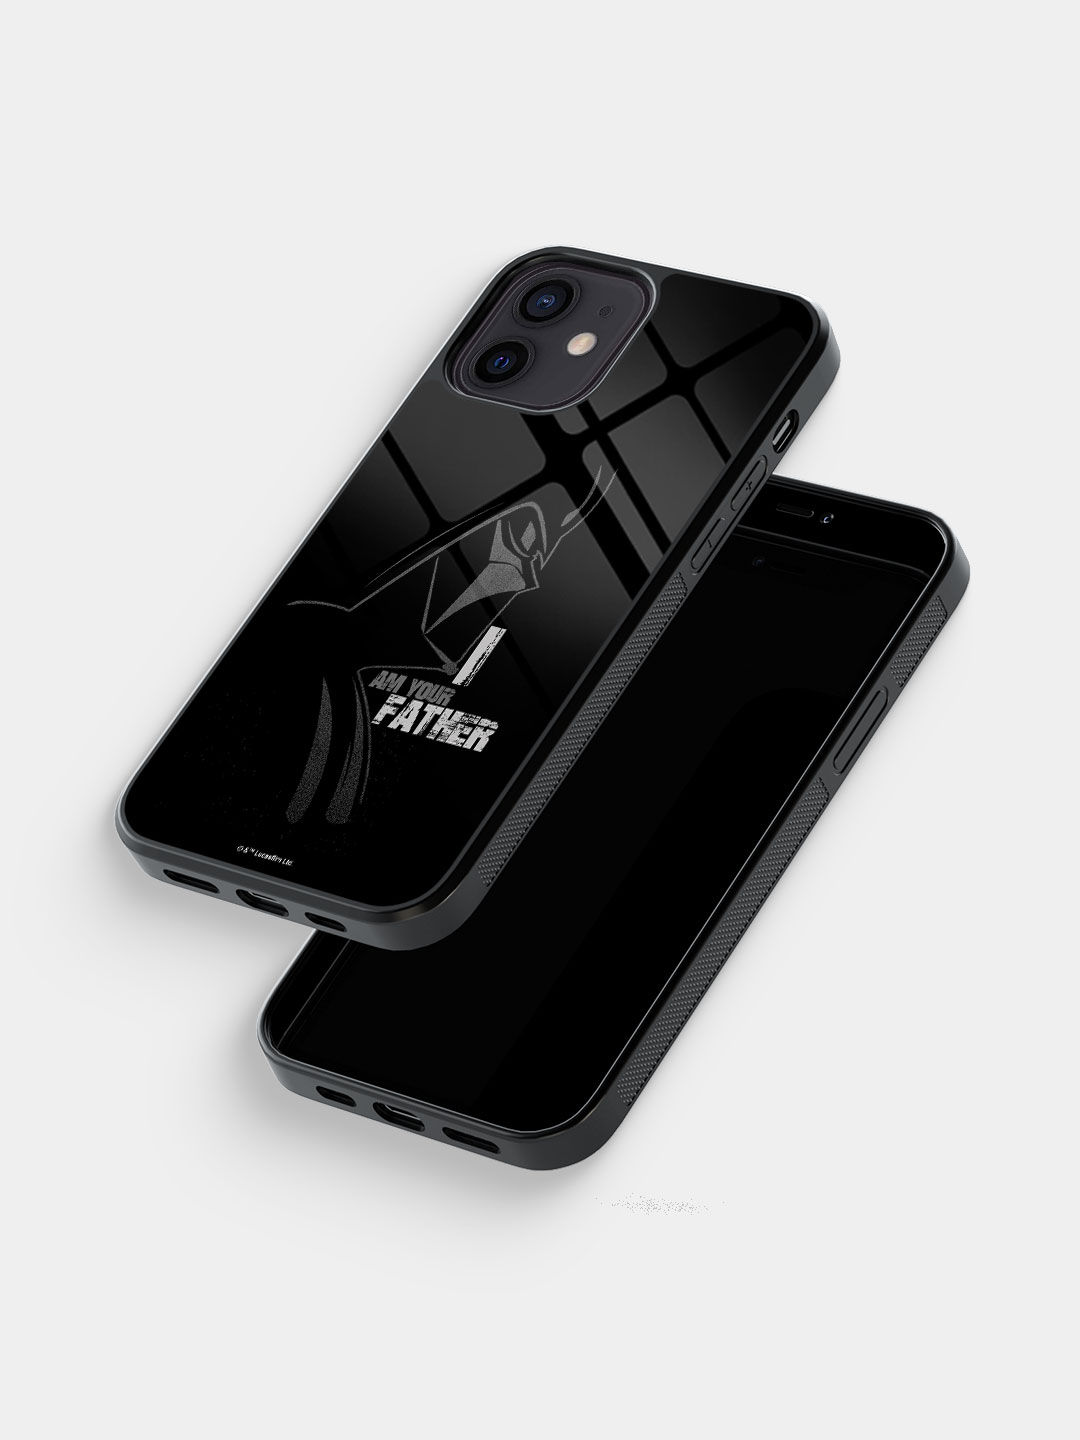 I am your Father - Glass Case For iPhone 12 Mini